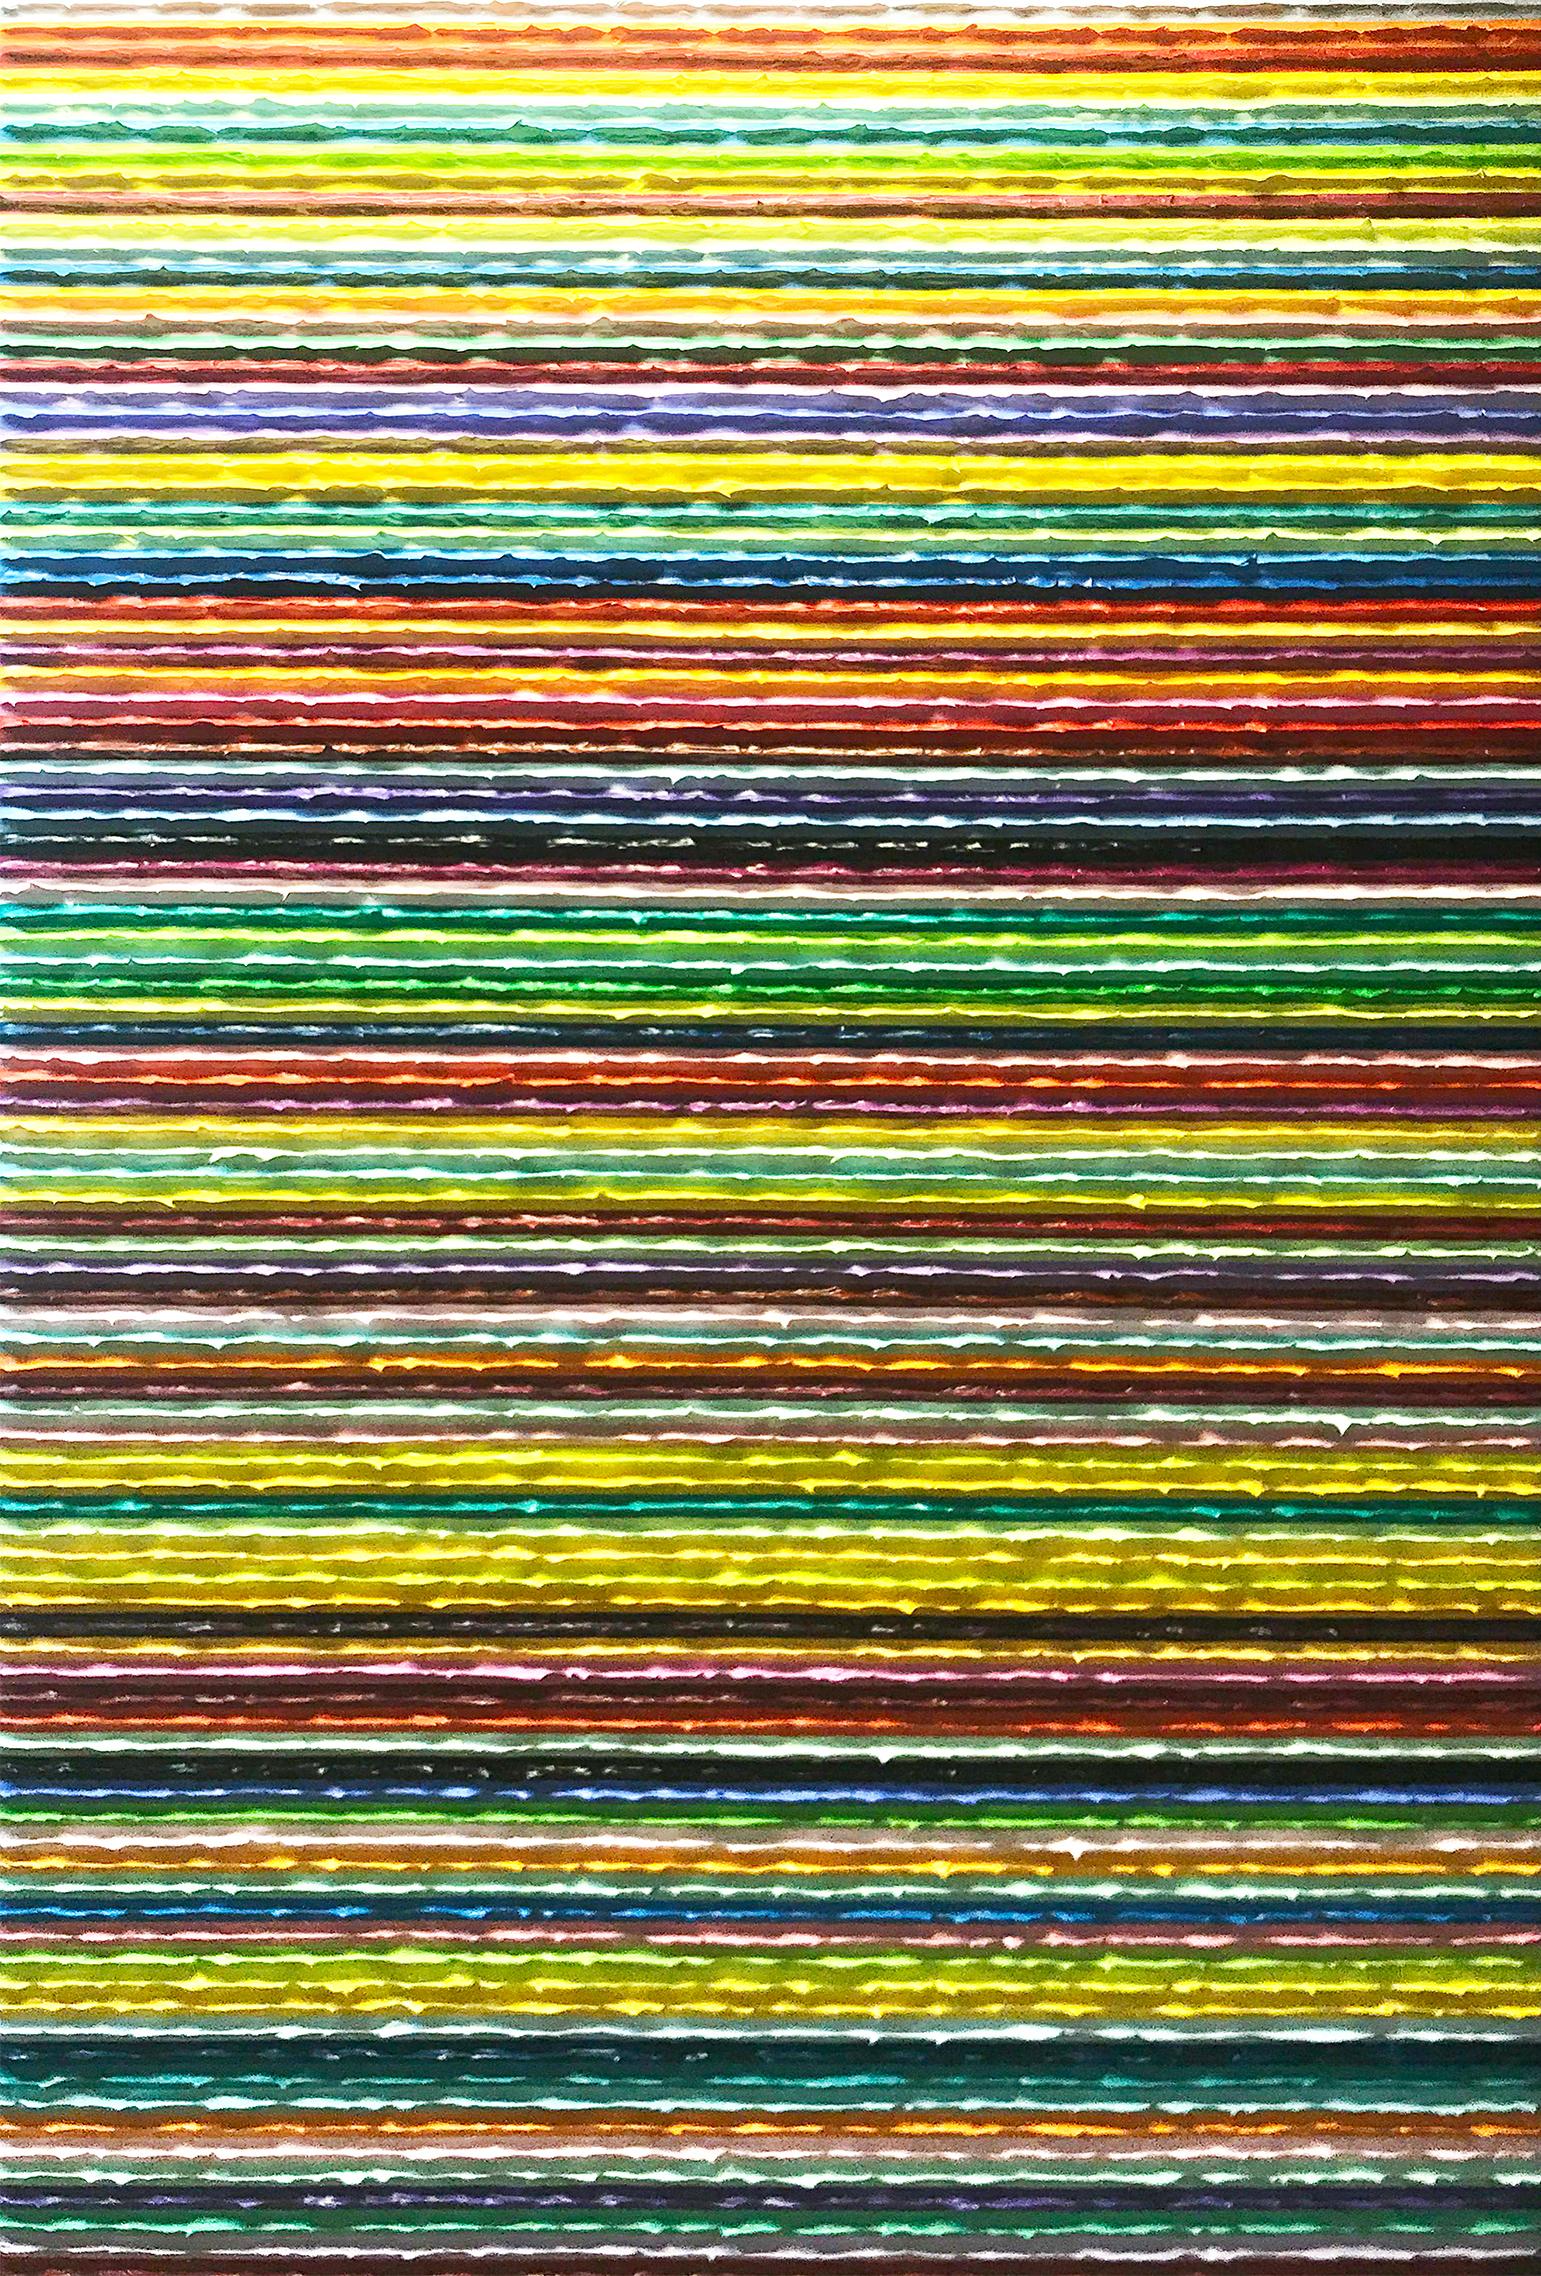 This painting is a large-scale example of the paintings of Daniel Klewer, coming from his series 'Linear Tactility.' The paintings in this series all share a consistent, linearly divided composition with investigations into the visual and